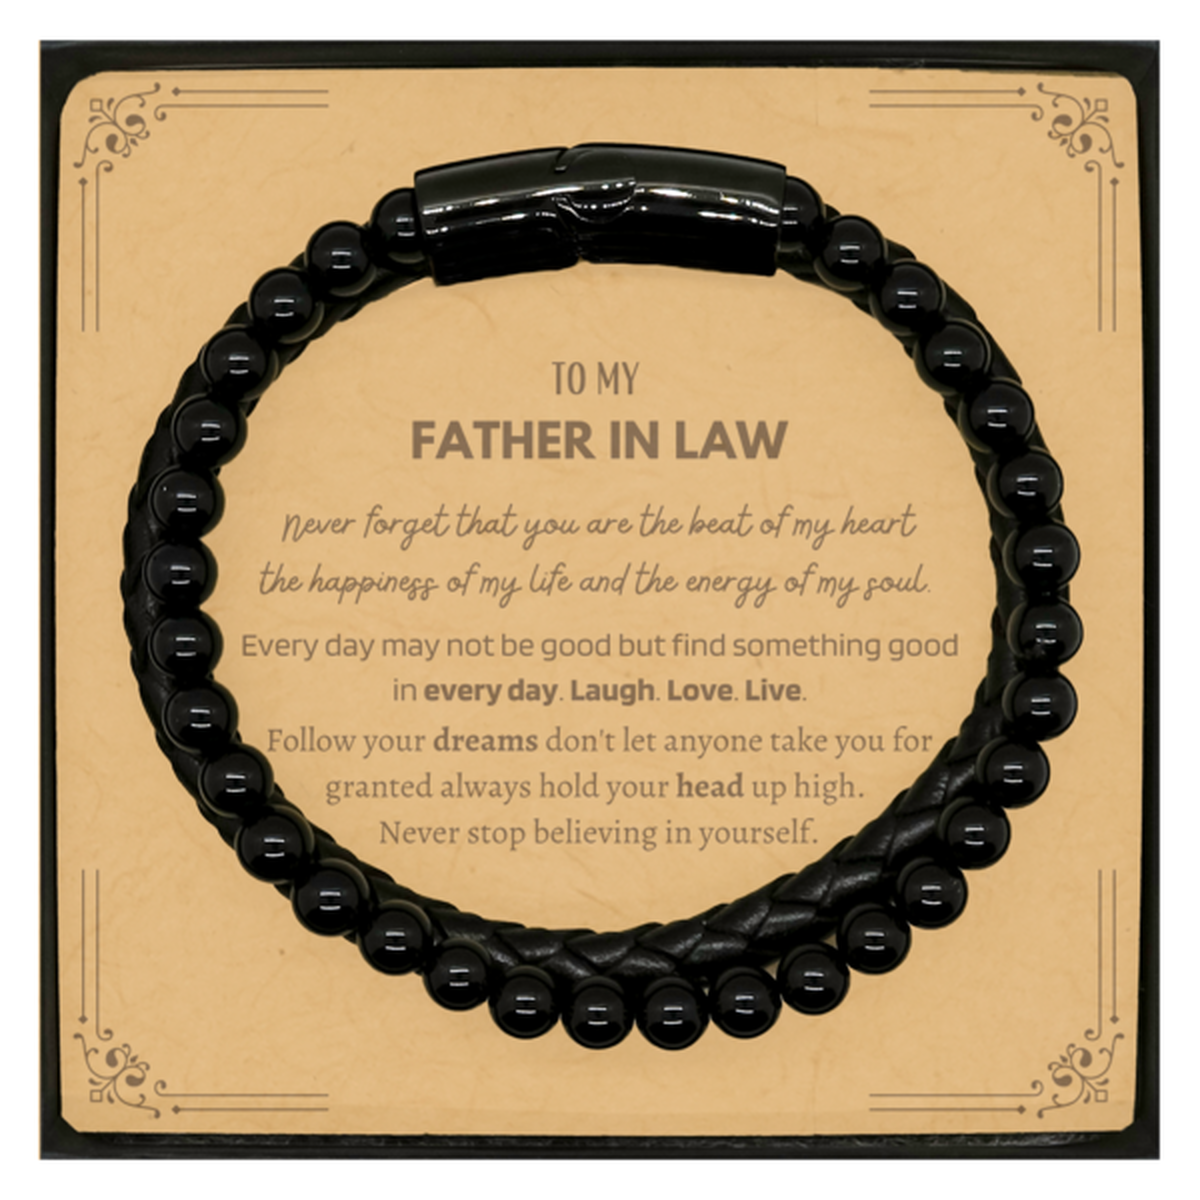 To My Father In Law Message Card Gifts, Christmas Father In Law Stone Leather Bracelets Present, Birthday Unique Motivational For Father In Law, To My Father In Law Never forget that you are the beat of my heart the happiness of my life and the energy of